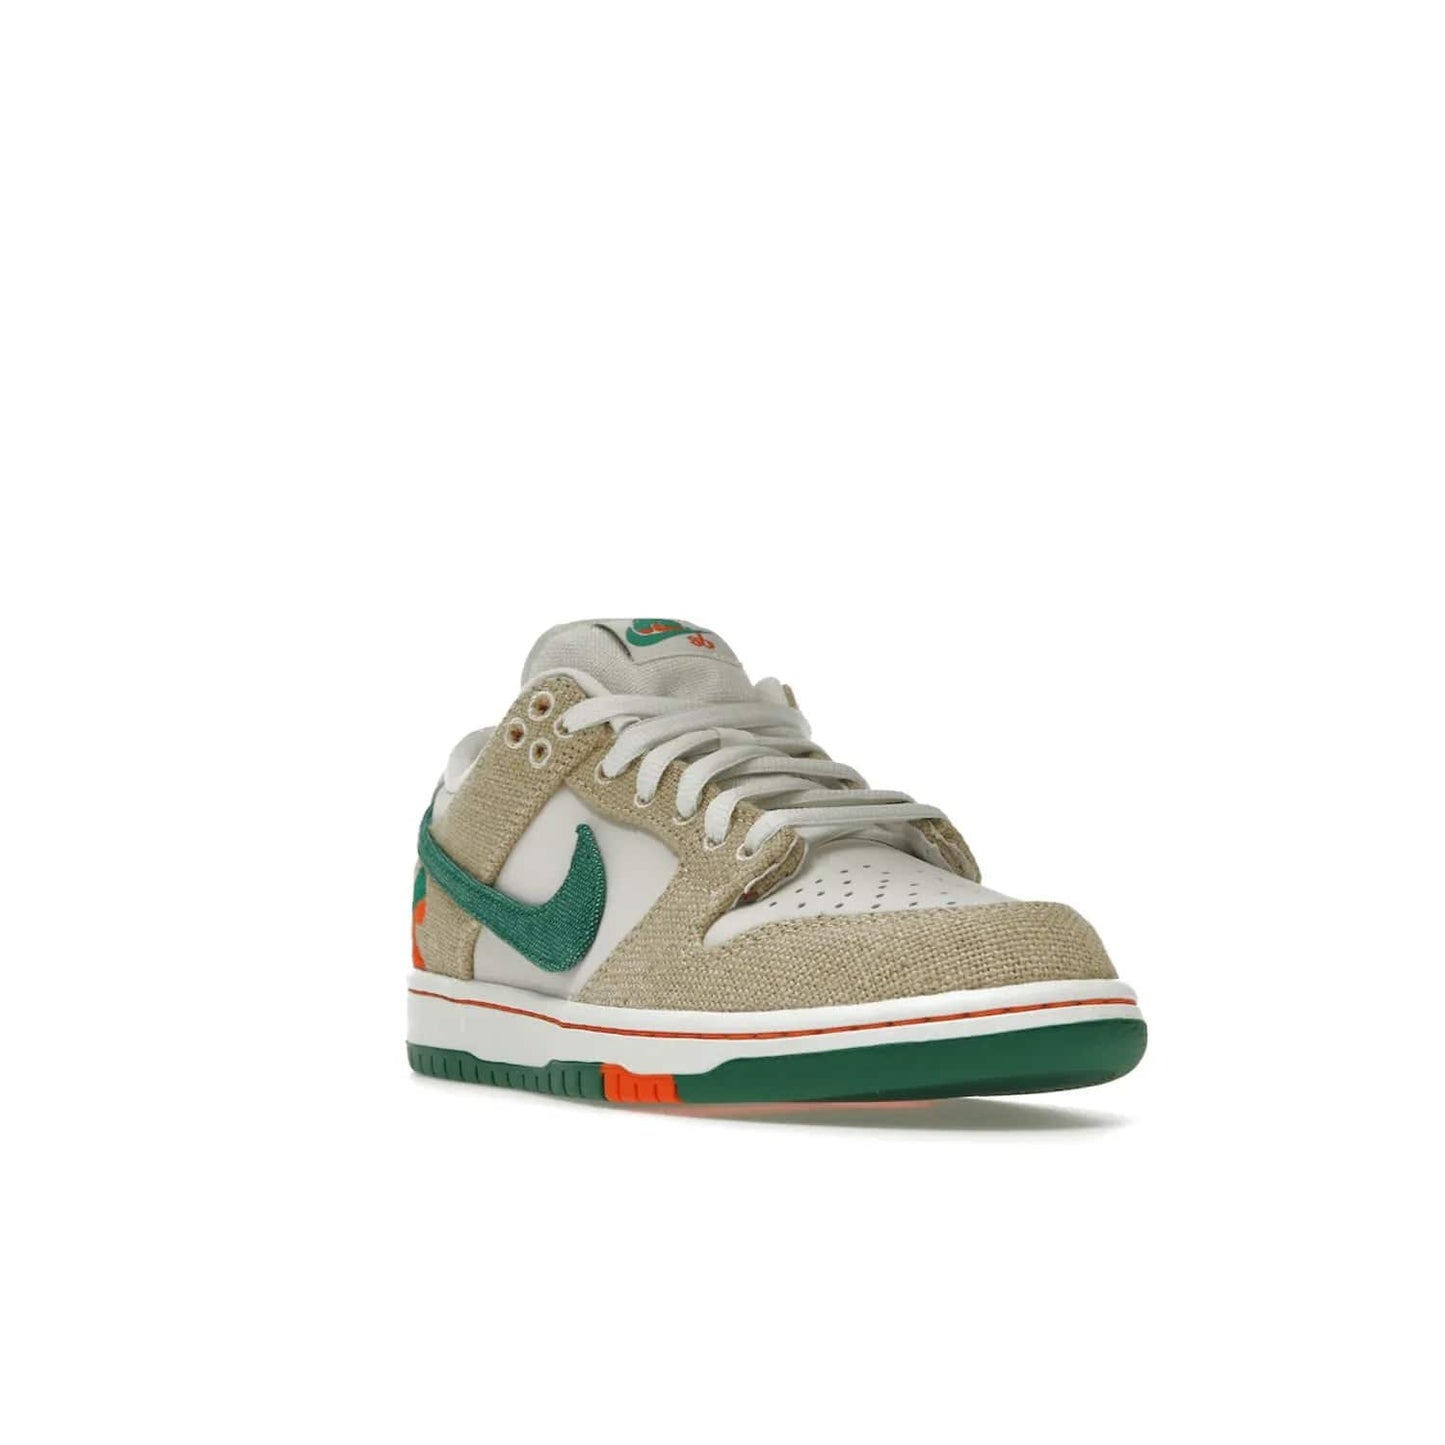 Nike SB Dunk Low Jarritos - Image 7 - Only at www.BallersClubKickz.com - Shop limited edition Nike SB Dunk Low Jarritos! Crafted with white leather and tear-away canvas materials with green accents. Includes orange, green, and white laces to customize your look. Available now.